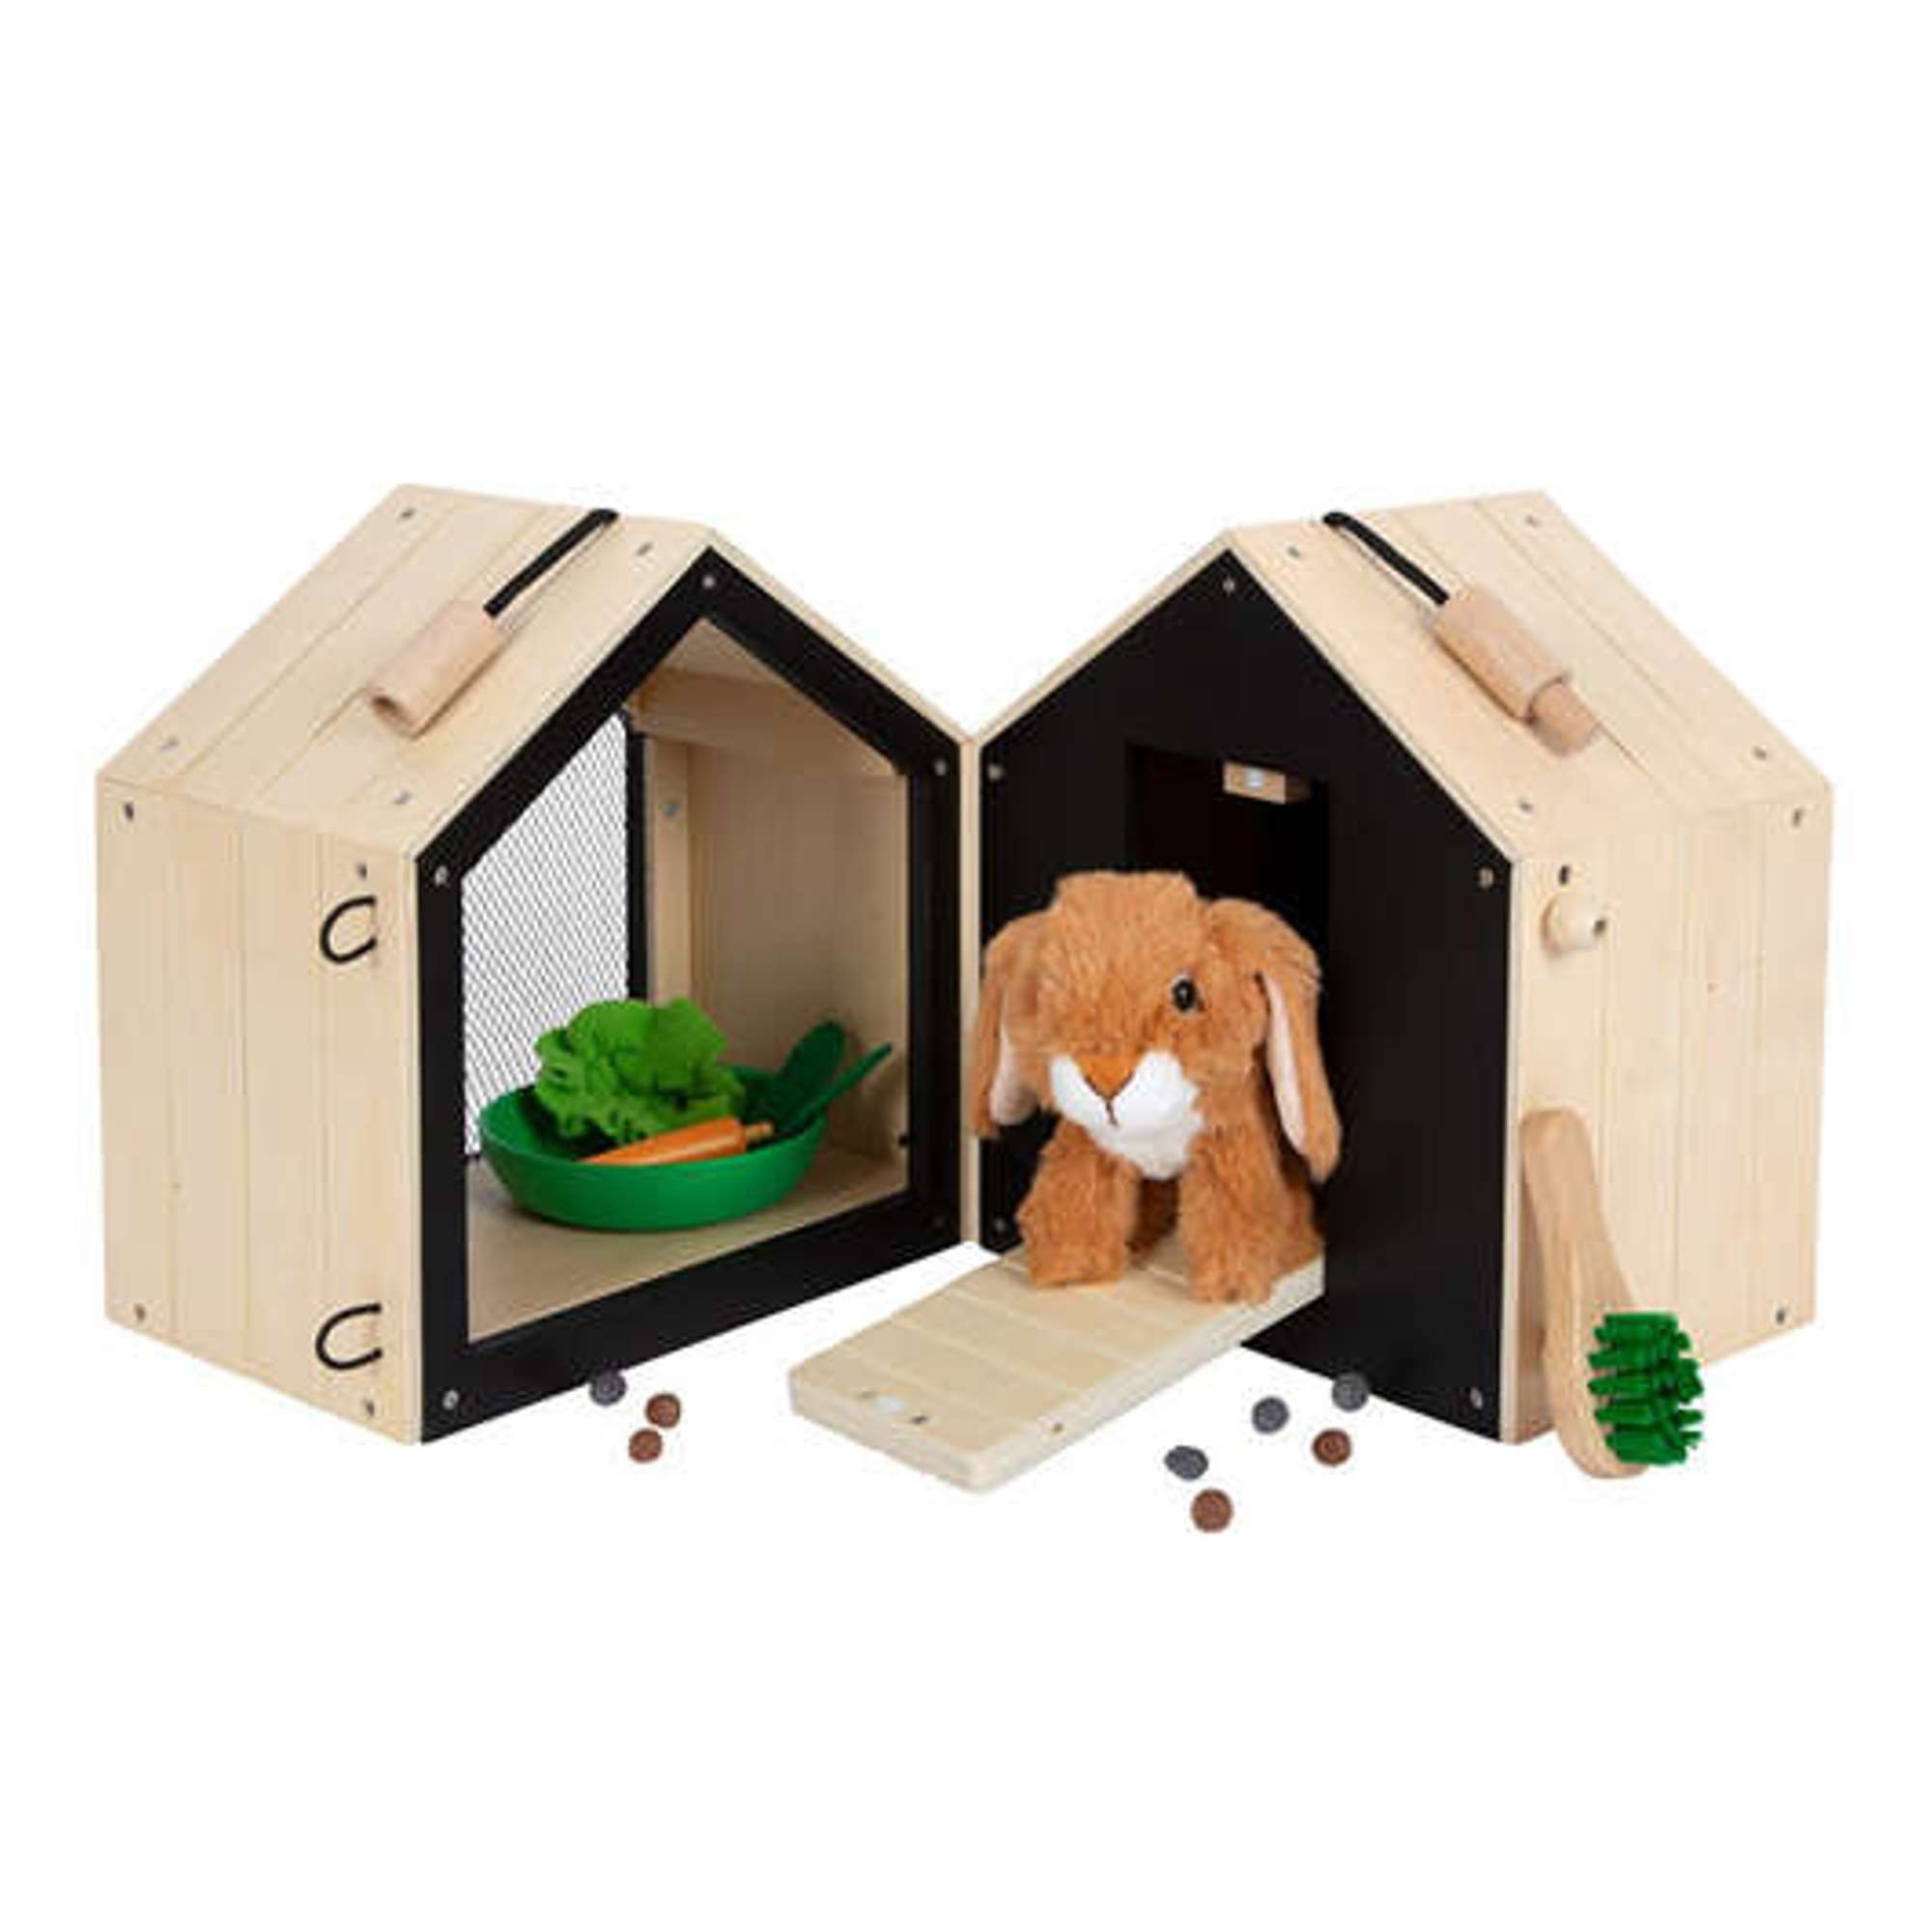 Small Foot: House with a plush rabbit